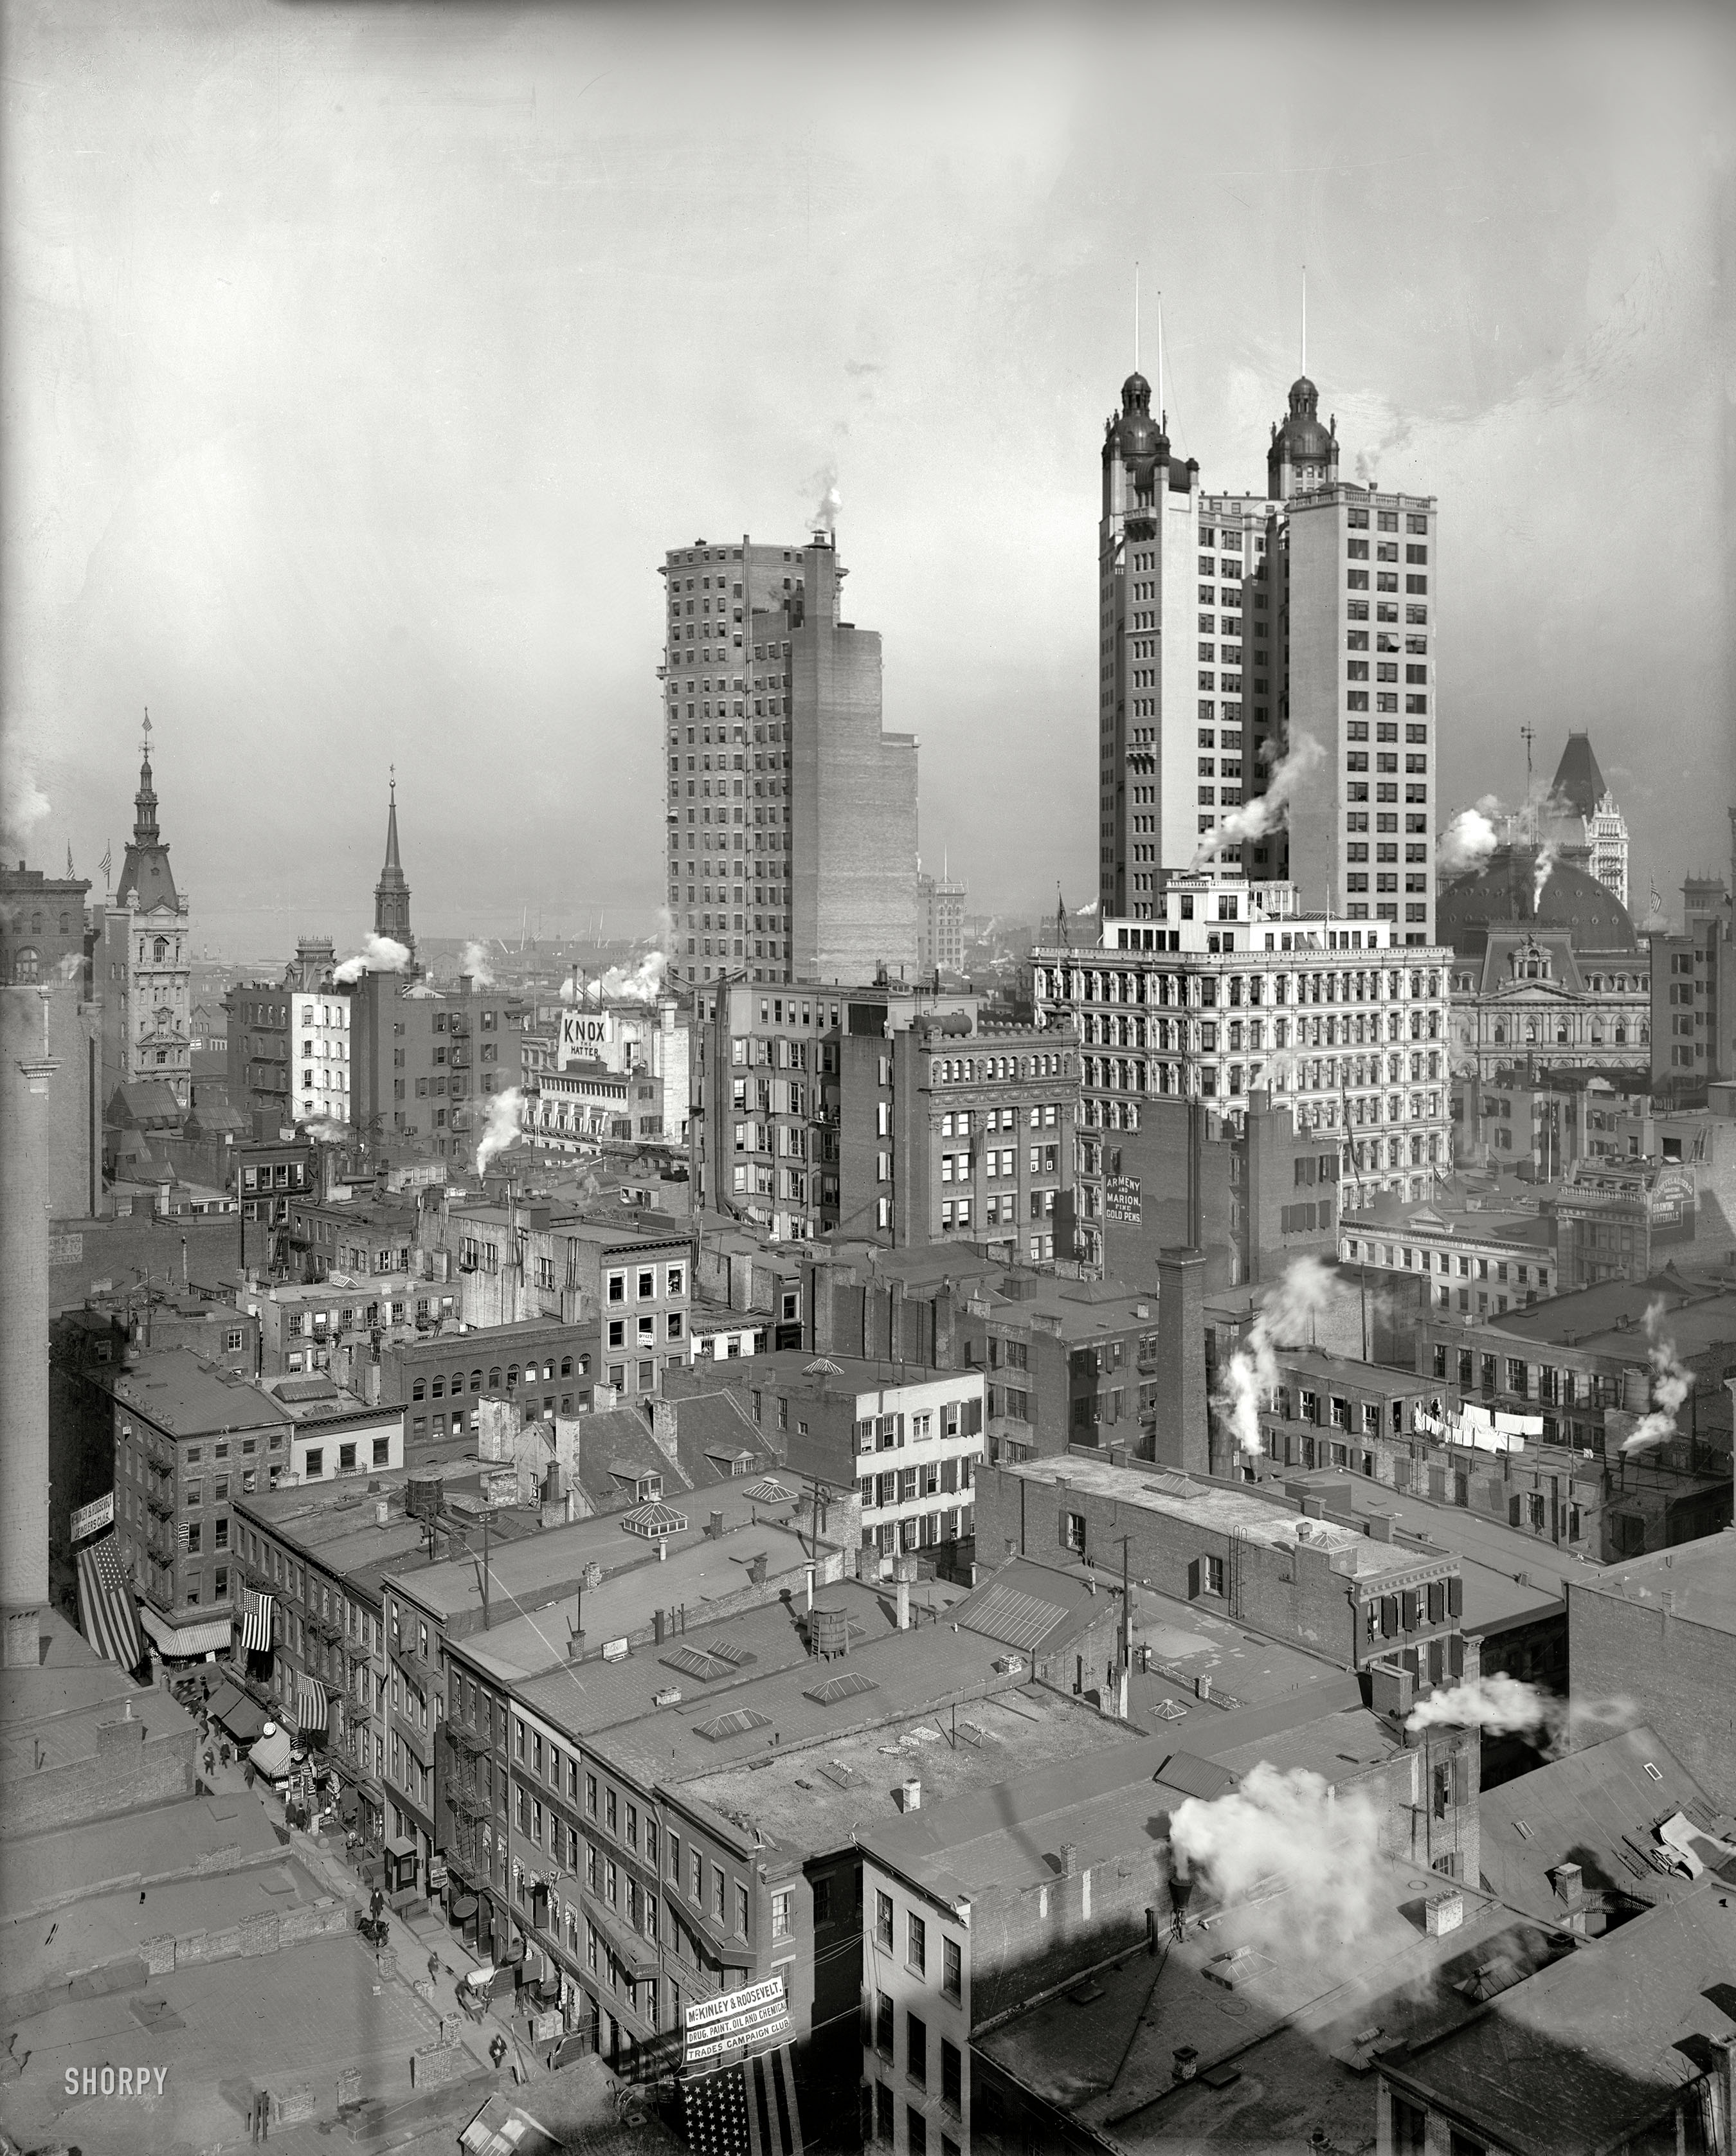 New York, 1900. "St. Paul and Park Row buildings, two tallest buildings in the world." Note the campaign banner at the bottom of the photo, shot from the Woodbridge building. 8x10 glass negative, Detroit Publishing. View full size.